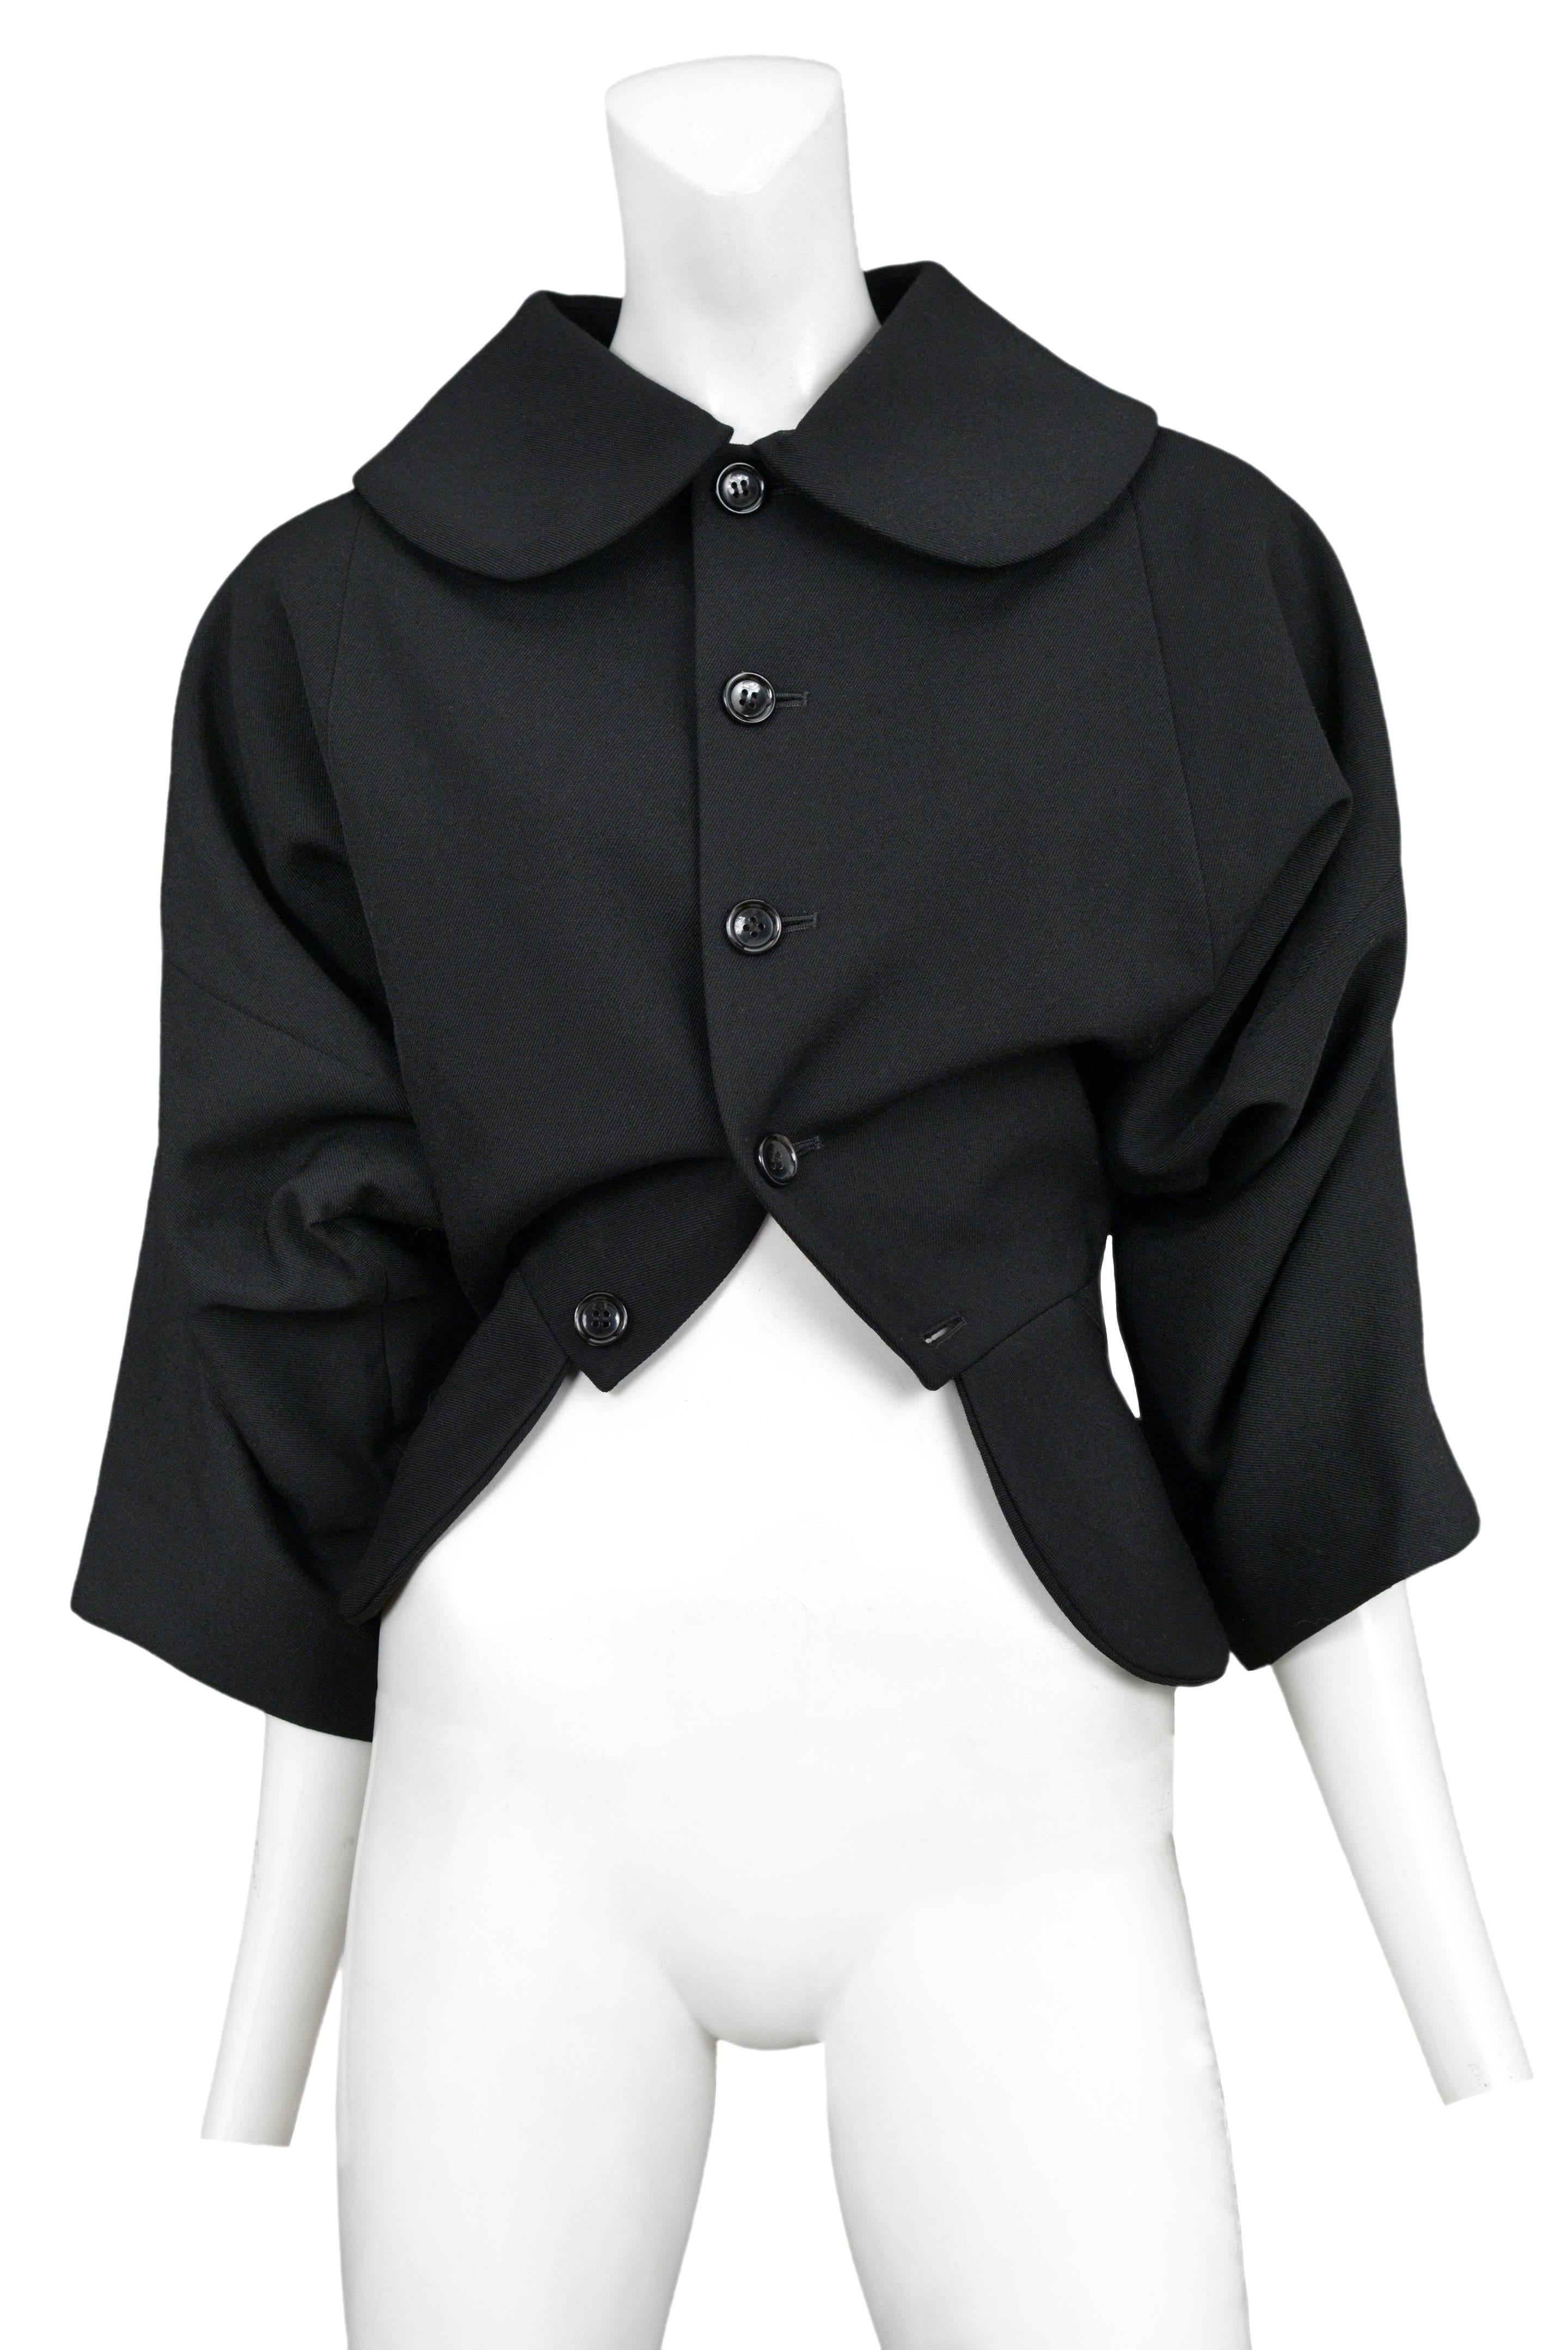 Vintage Comme des Garcons black upside down 3/4 sleeve jacket featuring a button front closure and a large peter pan collar.
Please inquire for additional images.